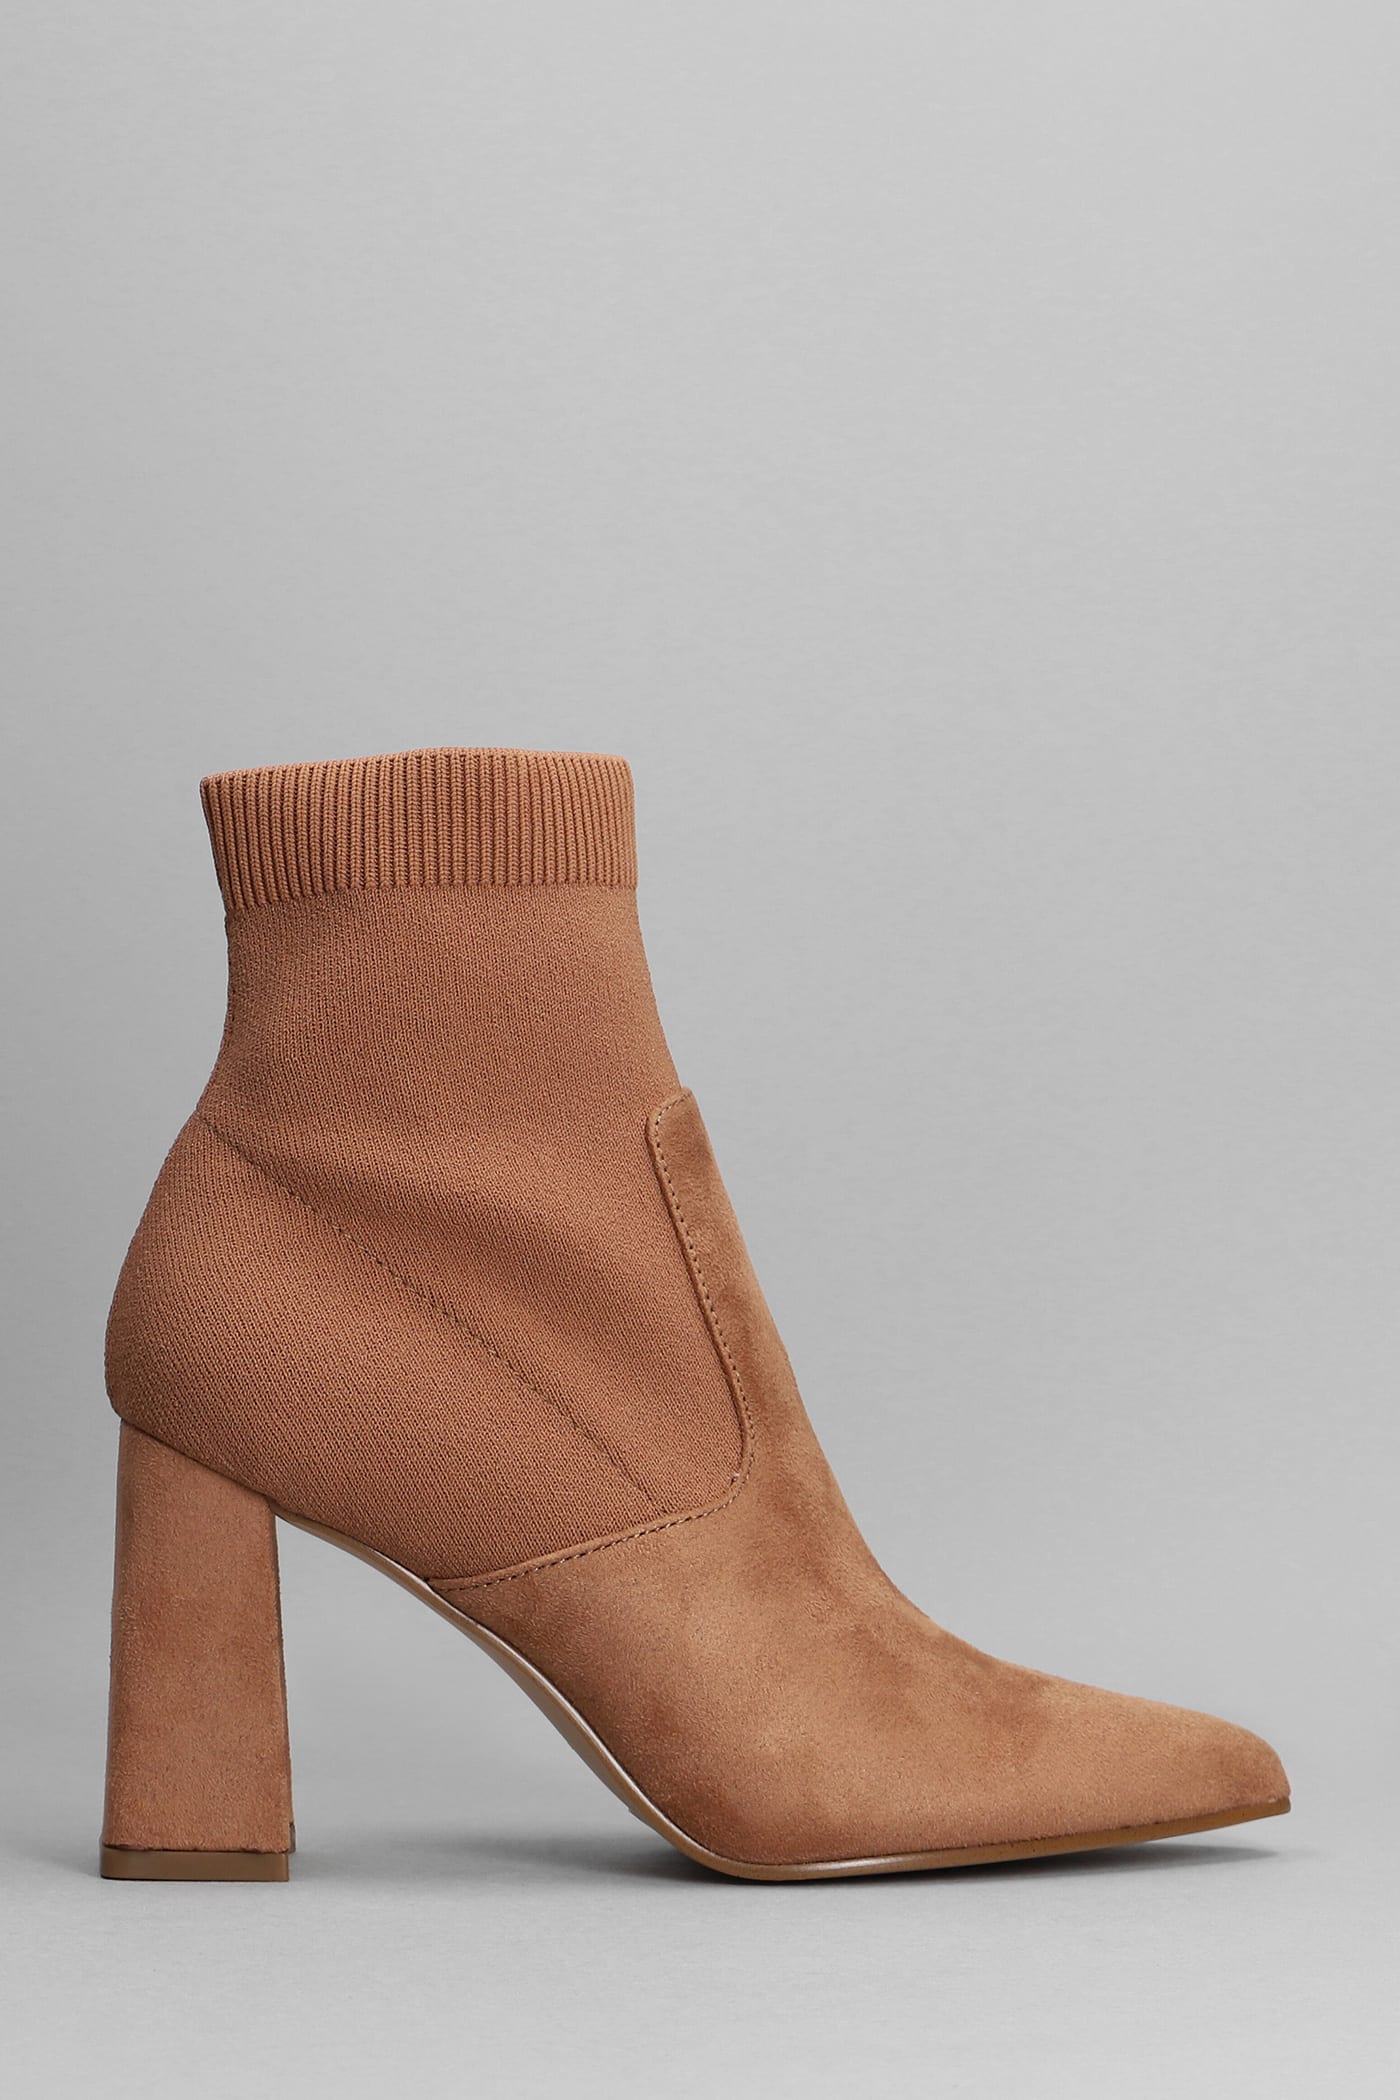 Steve Madden Ramp Up High Heels Ankle Boots In Taupe Suede And Fabric